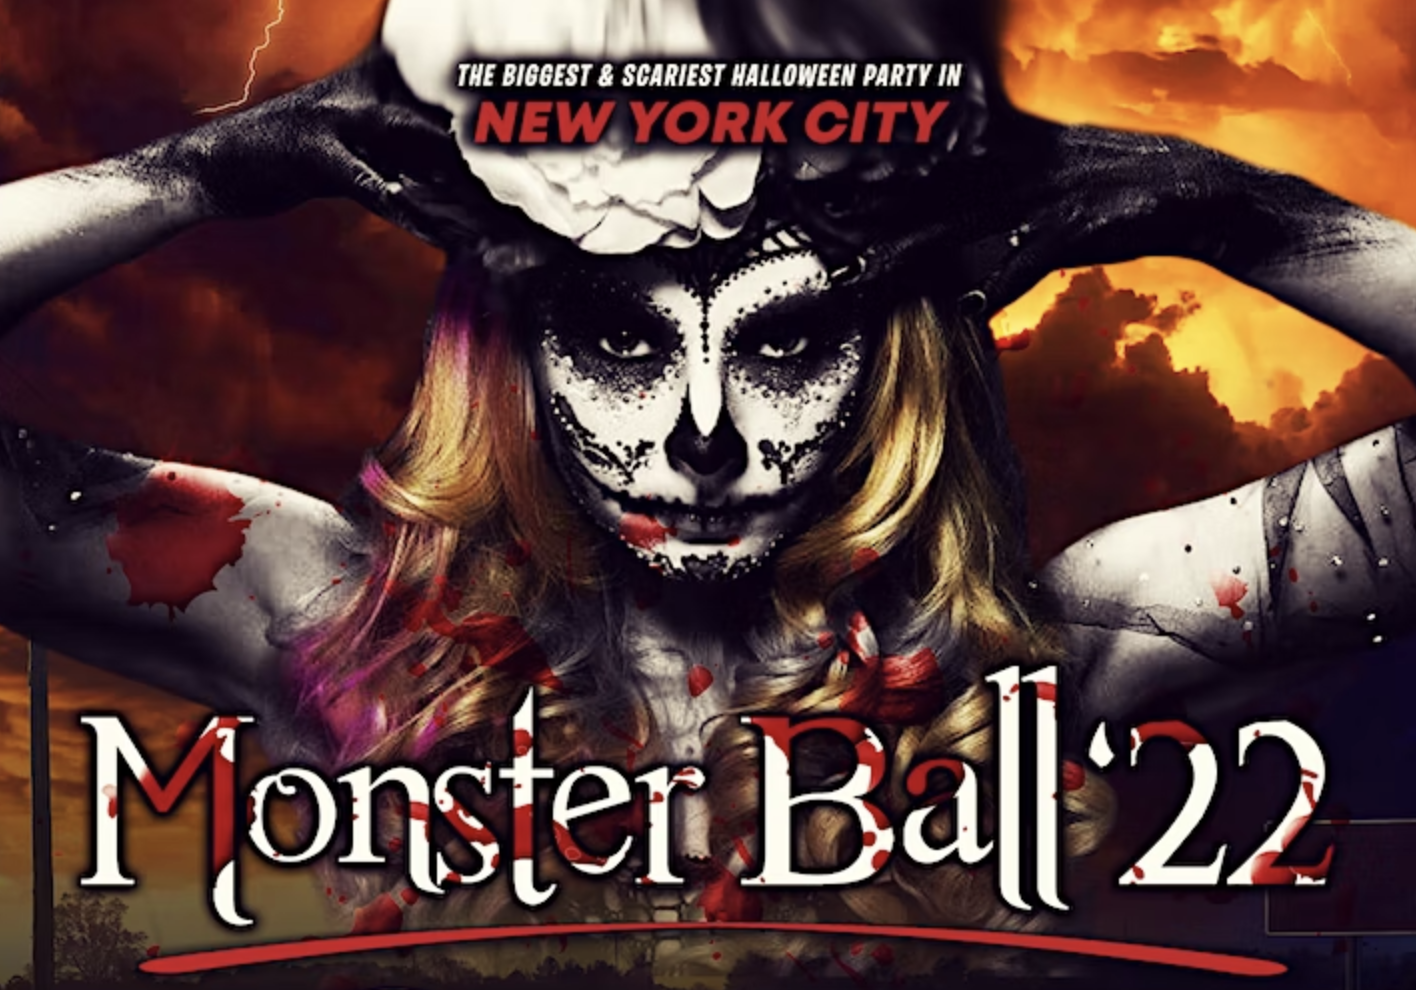 NYCs Biggest, Sexiest & Naughtiest Halloween Party 2022 The Monster Ball